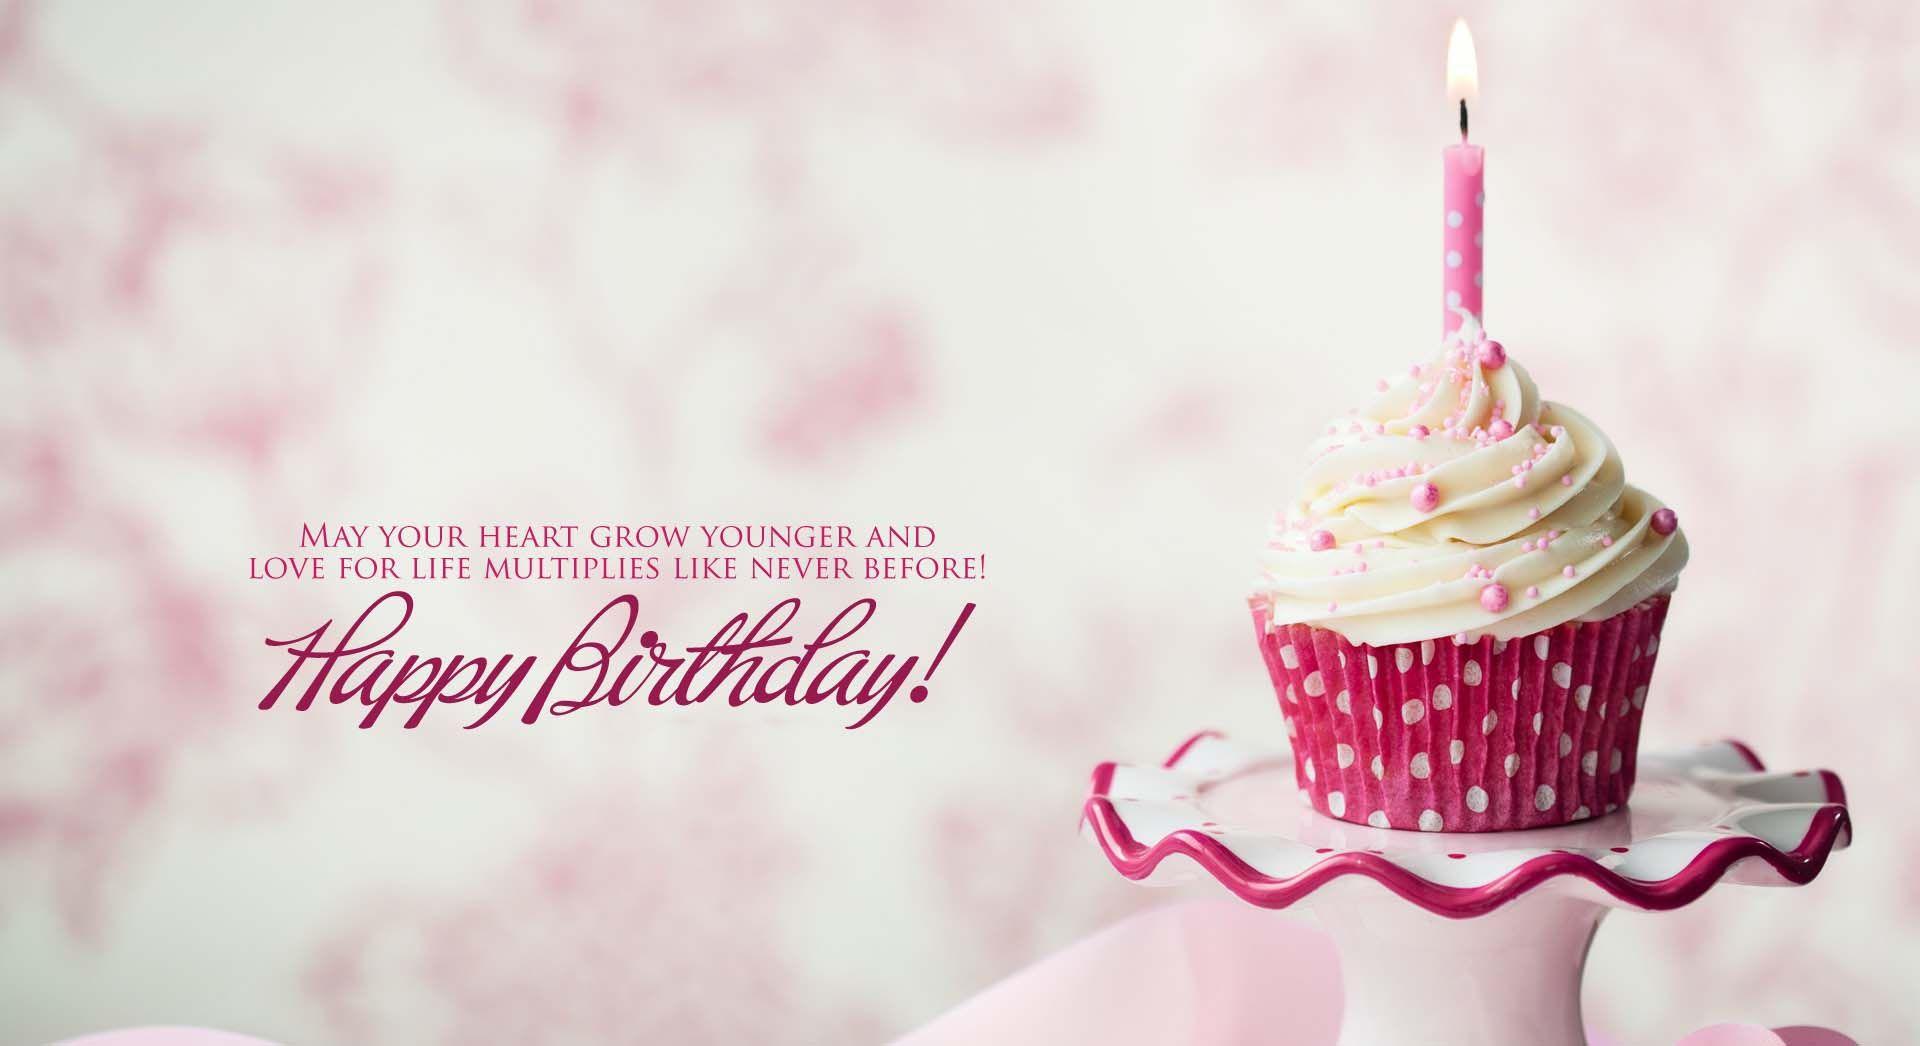 Birthday Cake Wallpaper Gallery, image collections of wallpaper